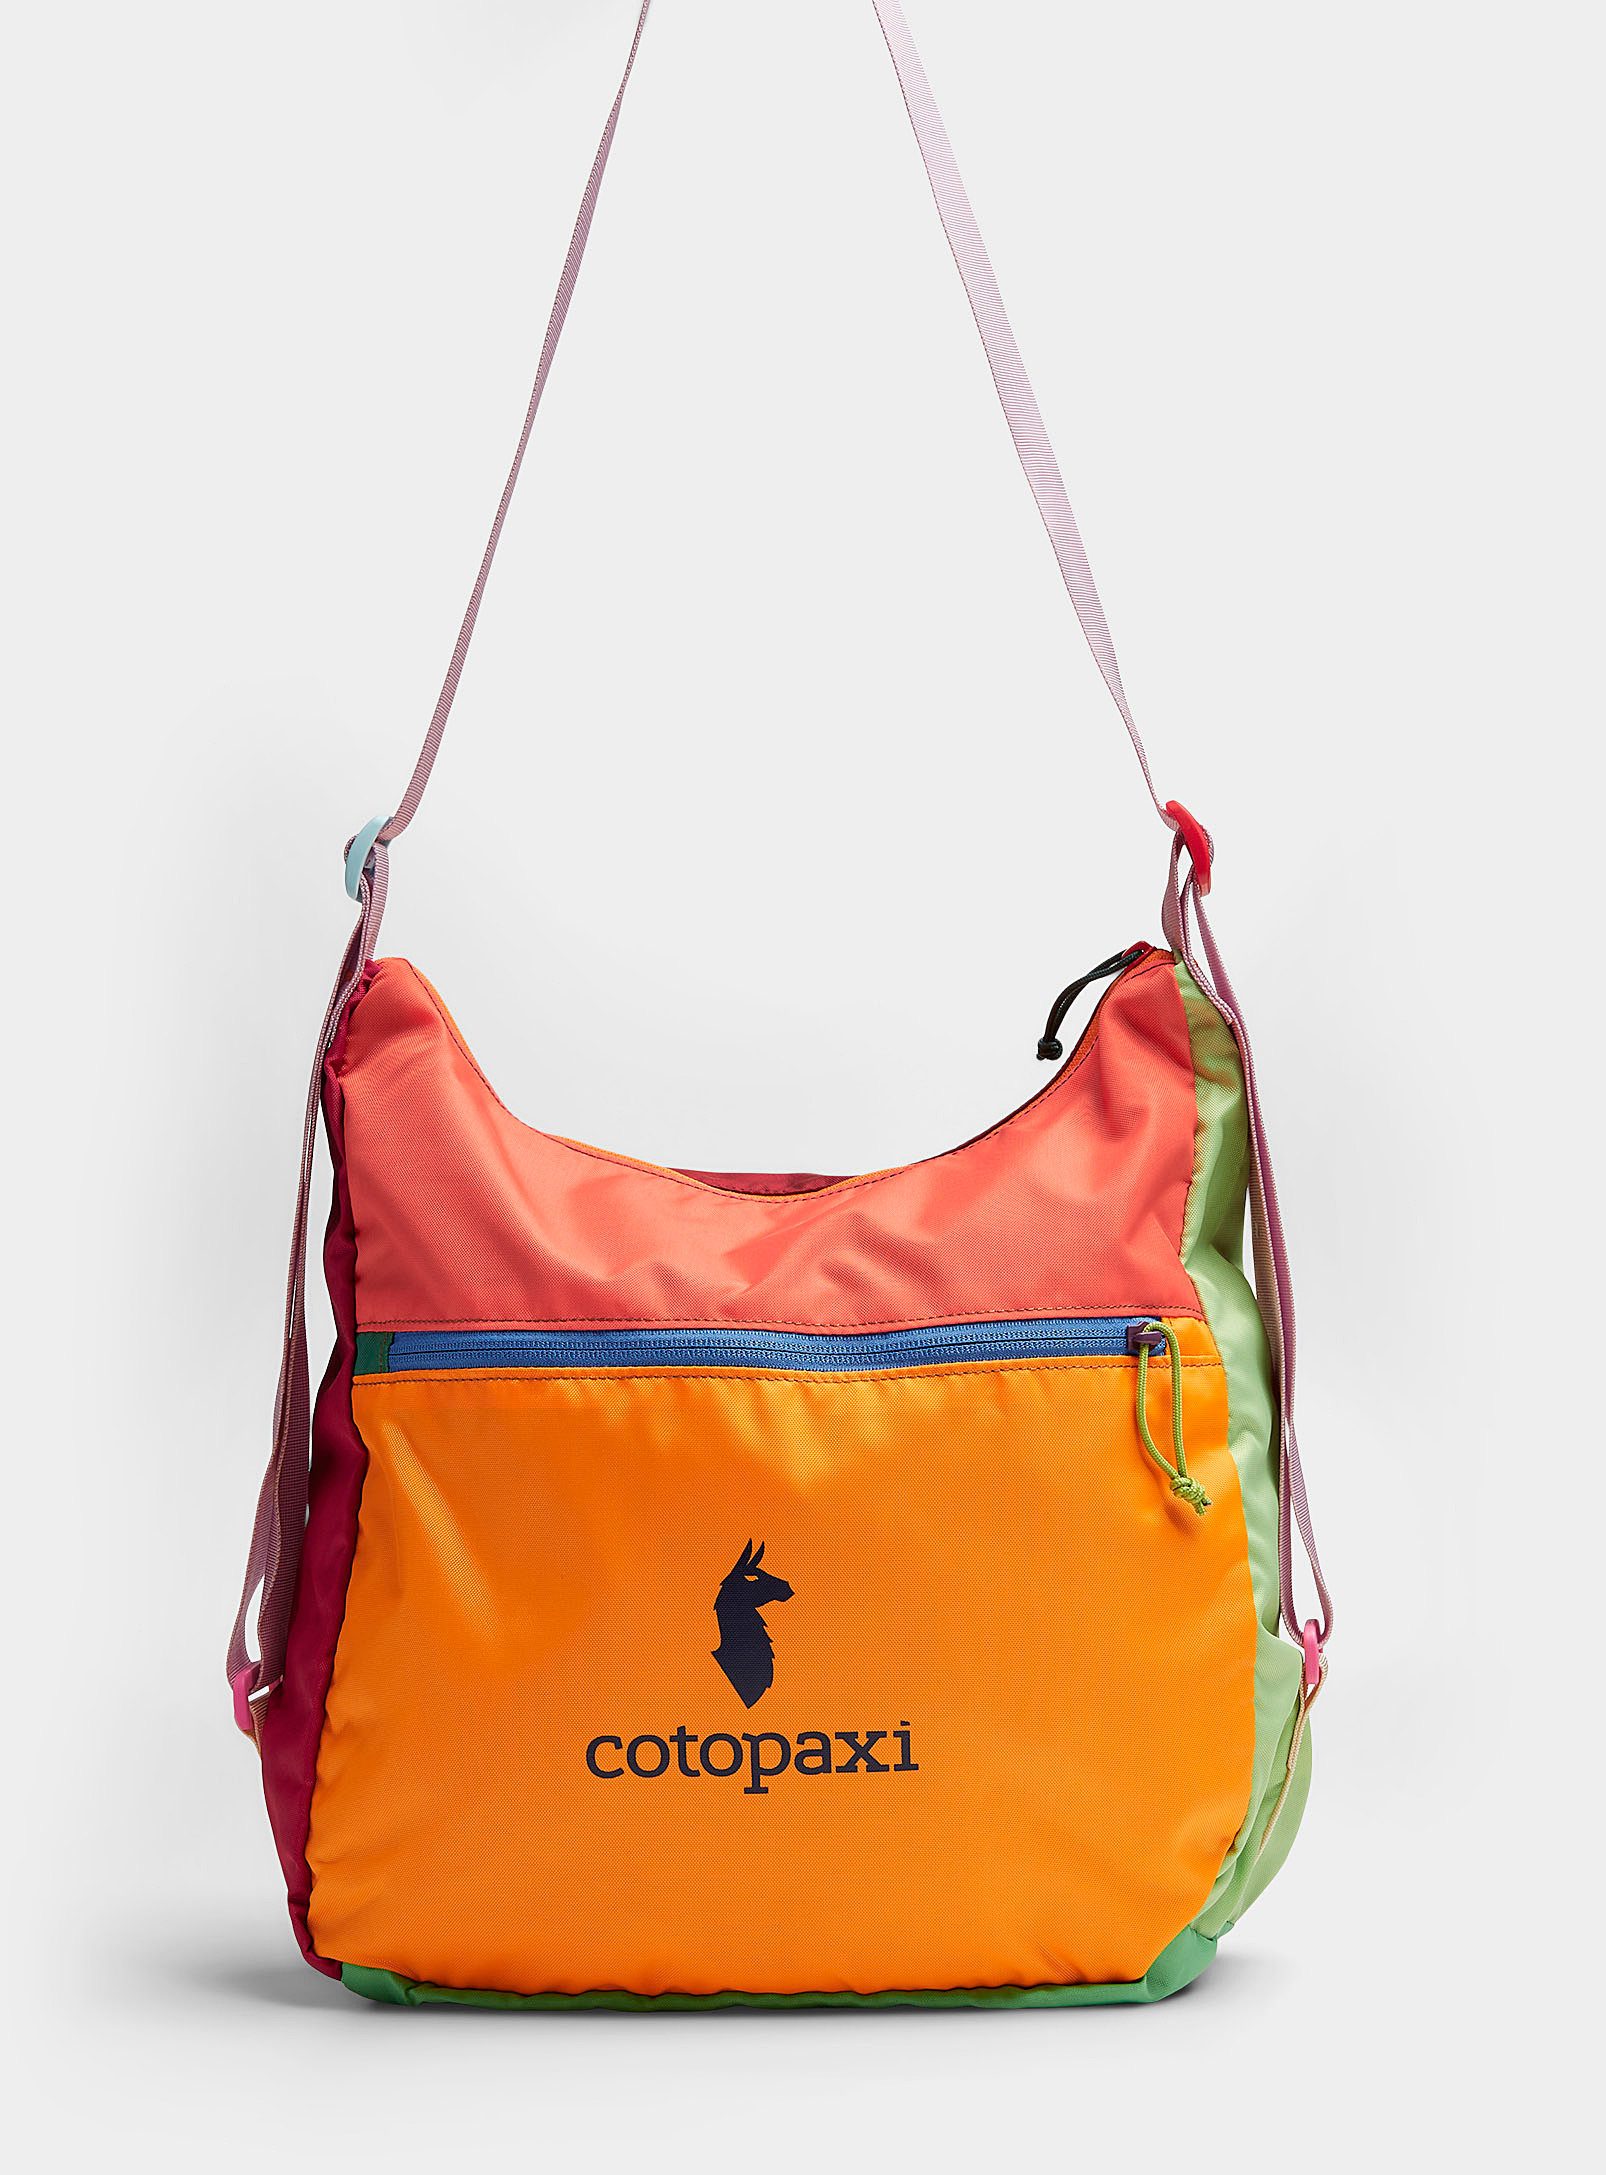 Cotopaxi - Men's Taal convertible shoulder tote One-of-a-kind colourways from the Del Da collection